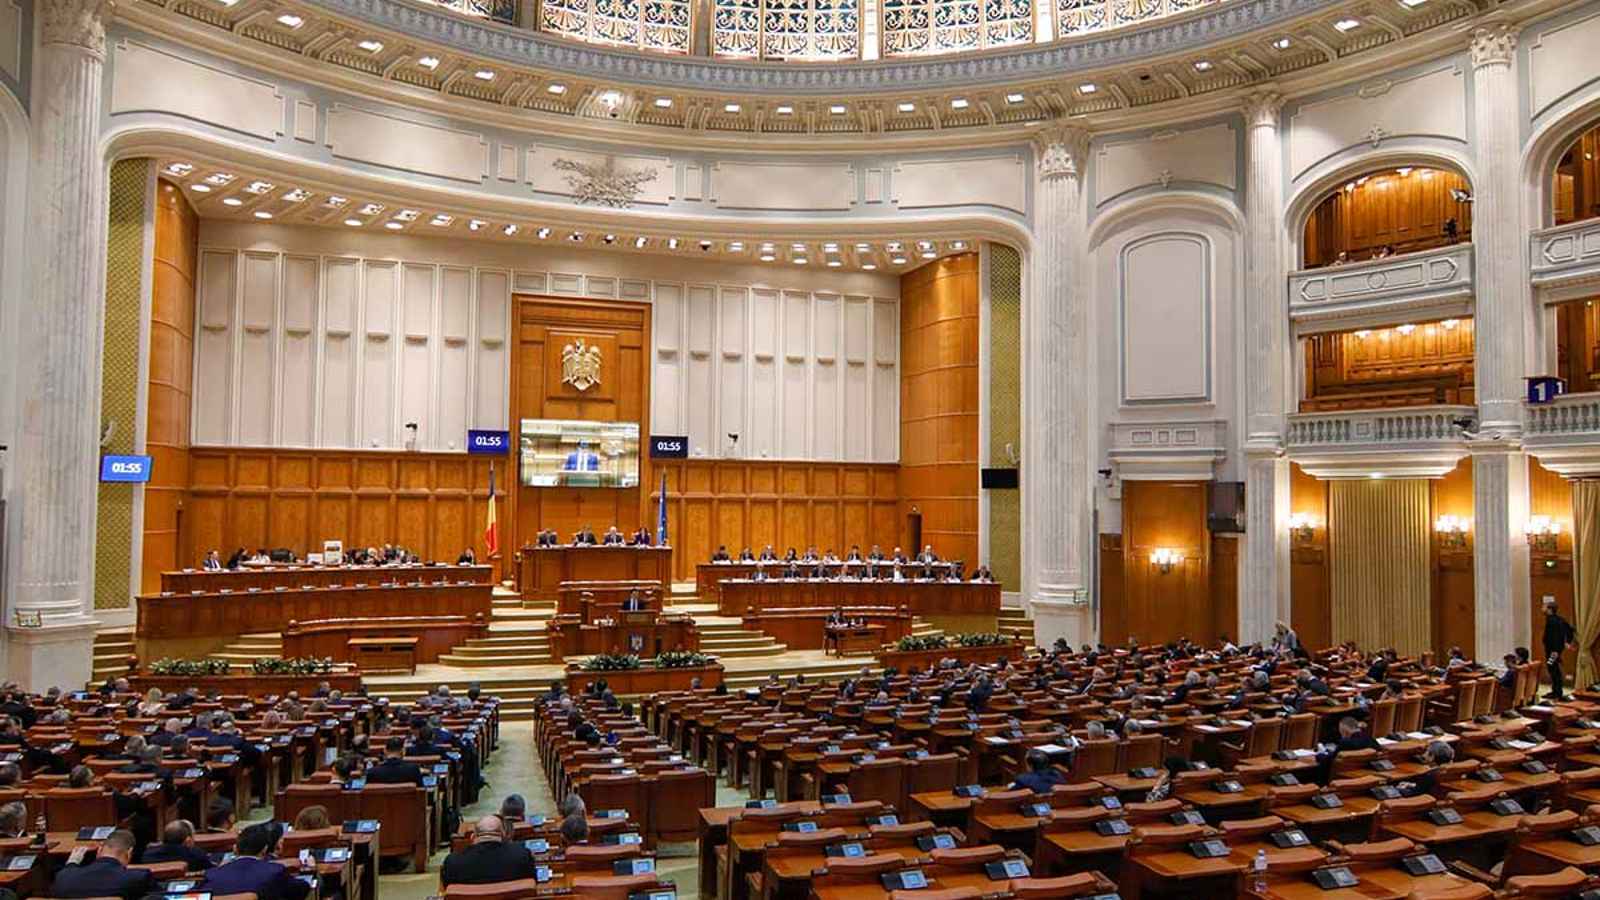 International Day of Parliamentarism 2023: Date, History, Facts about Parliamentary Democracy